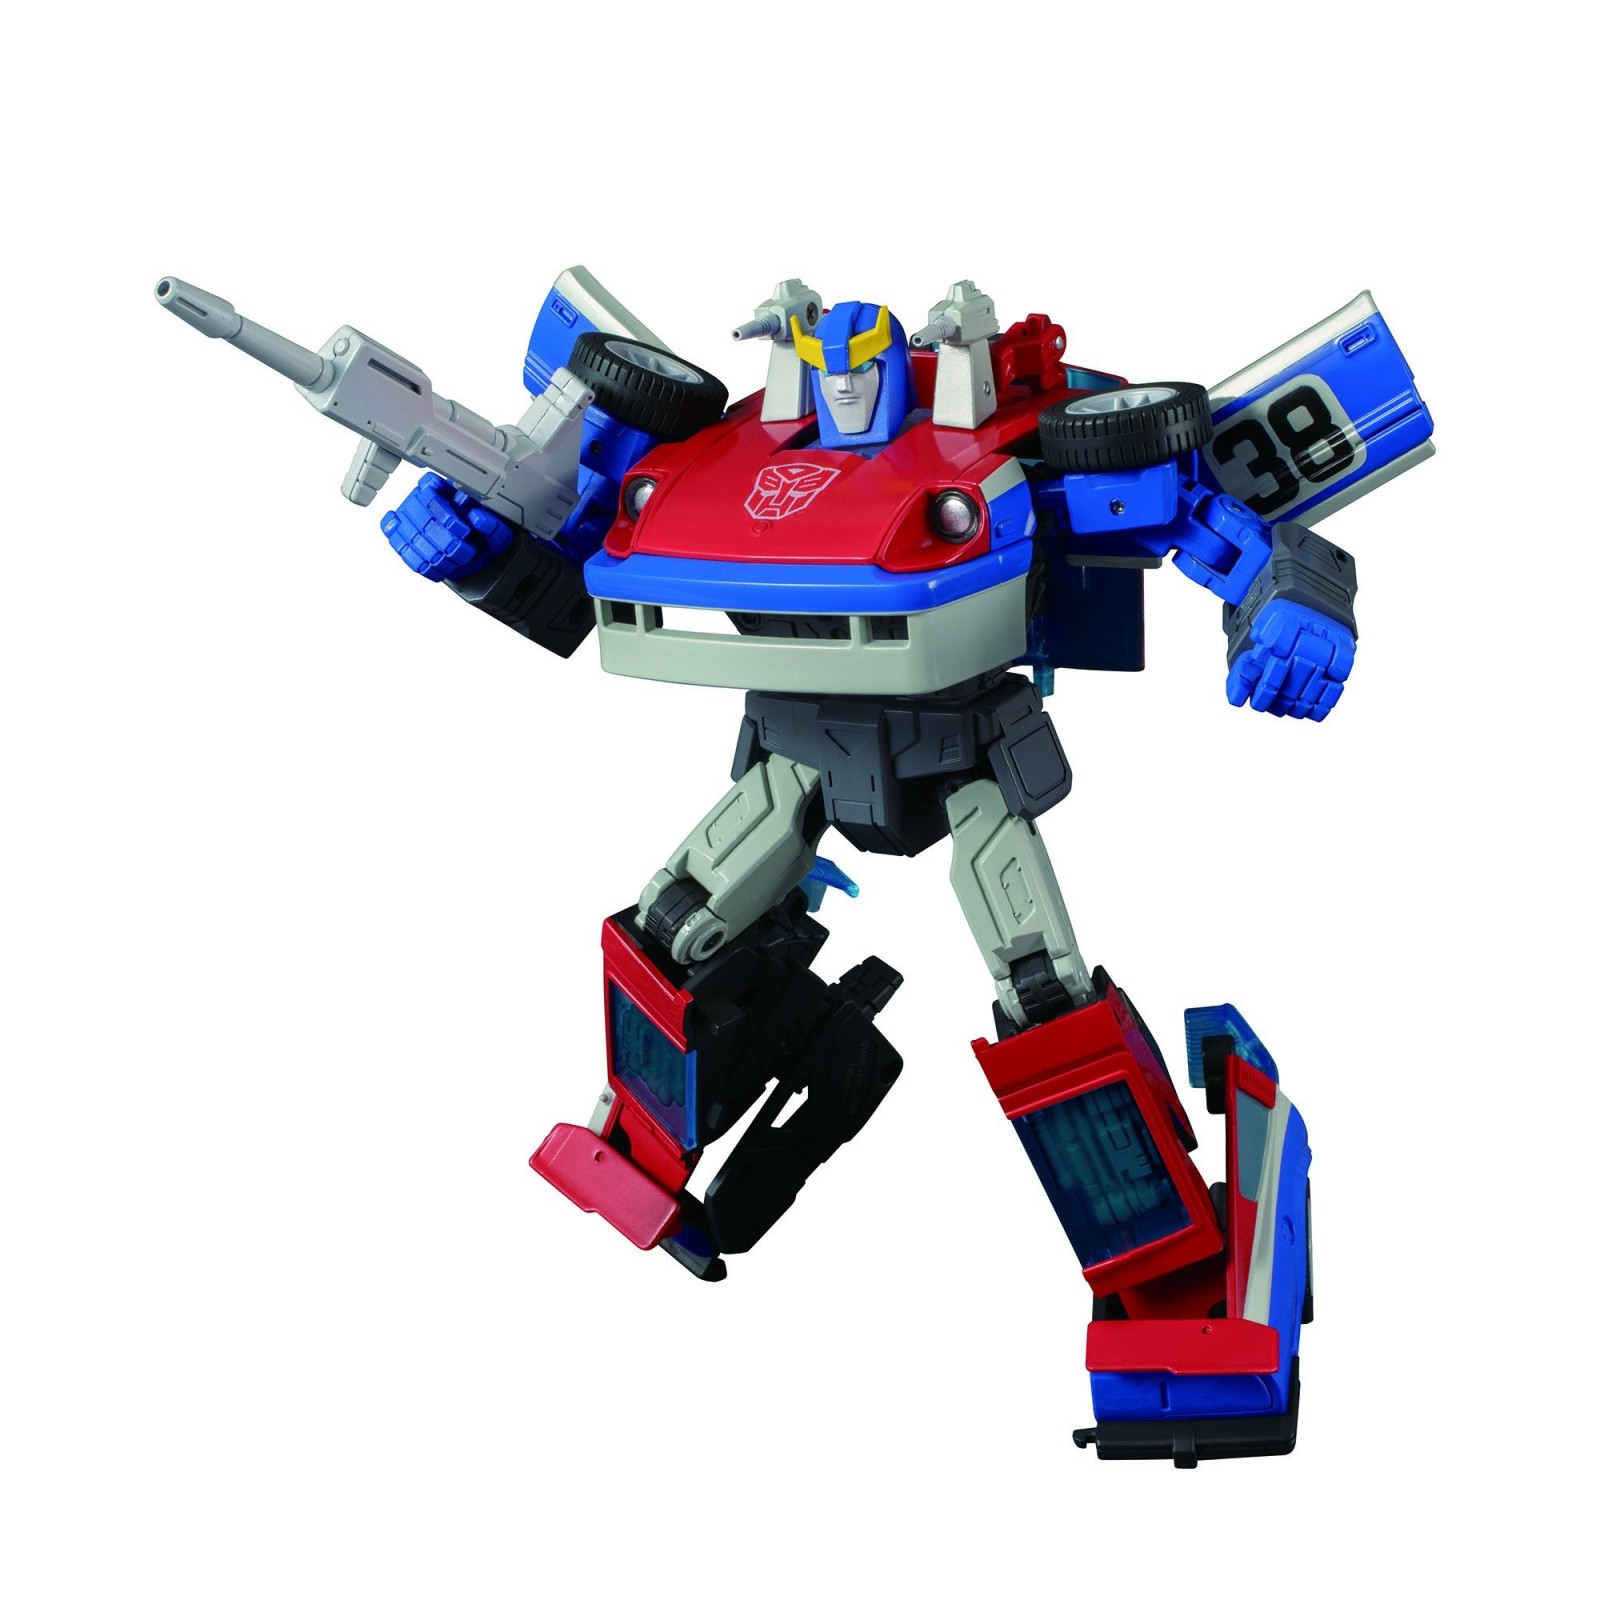 Transformers News: Bigger Higher Quality Images of Takara Tomy Transformers MP 19 Smokescreen